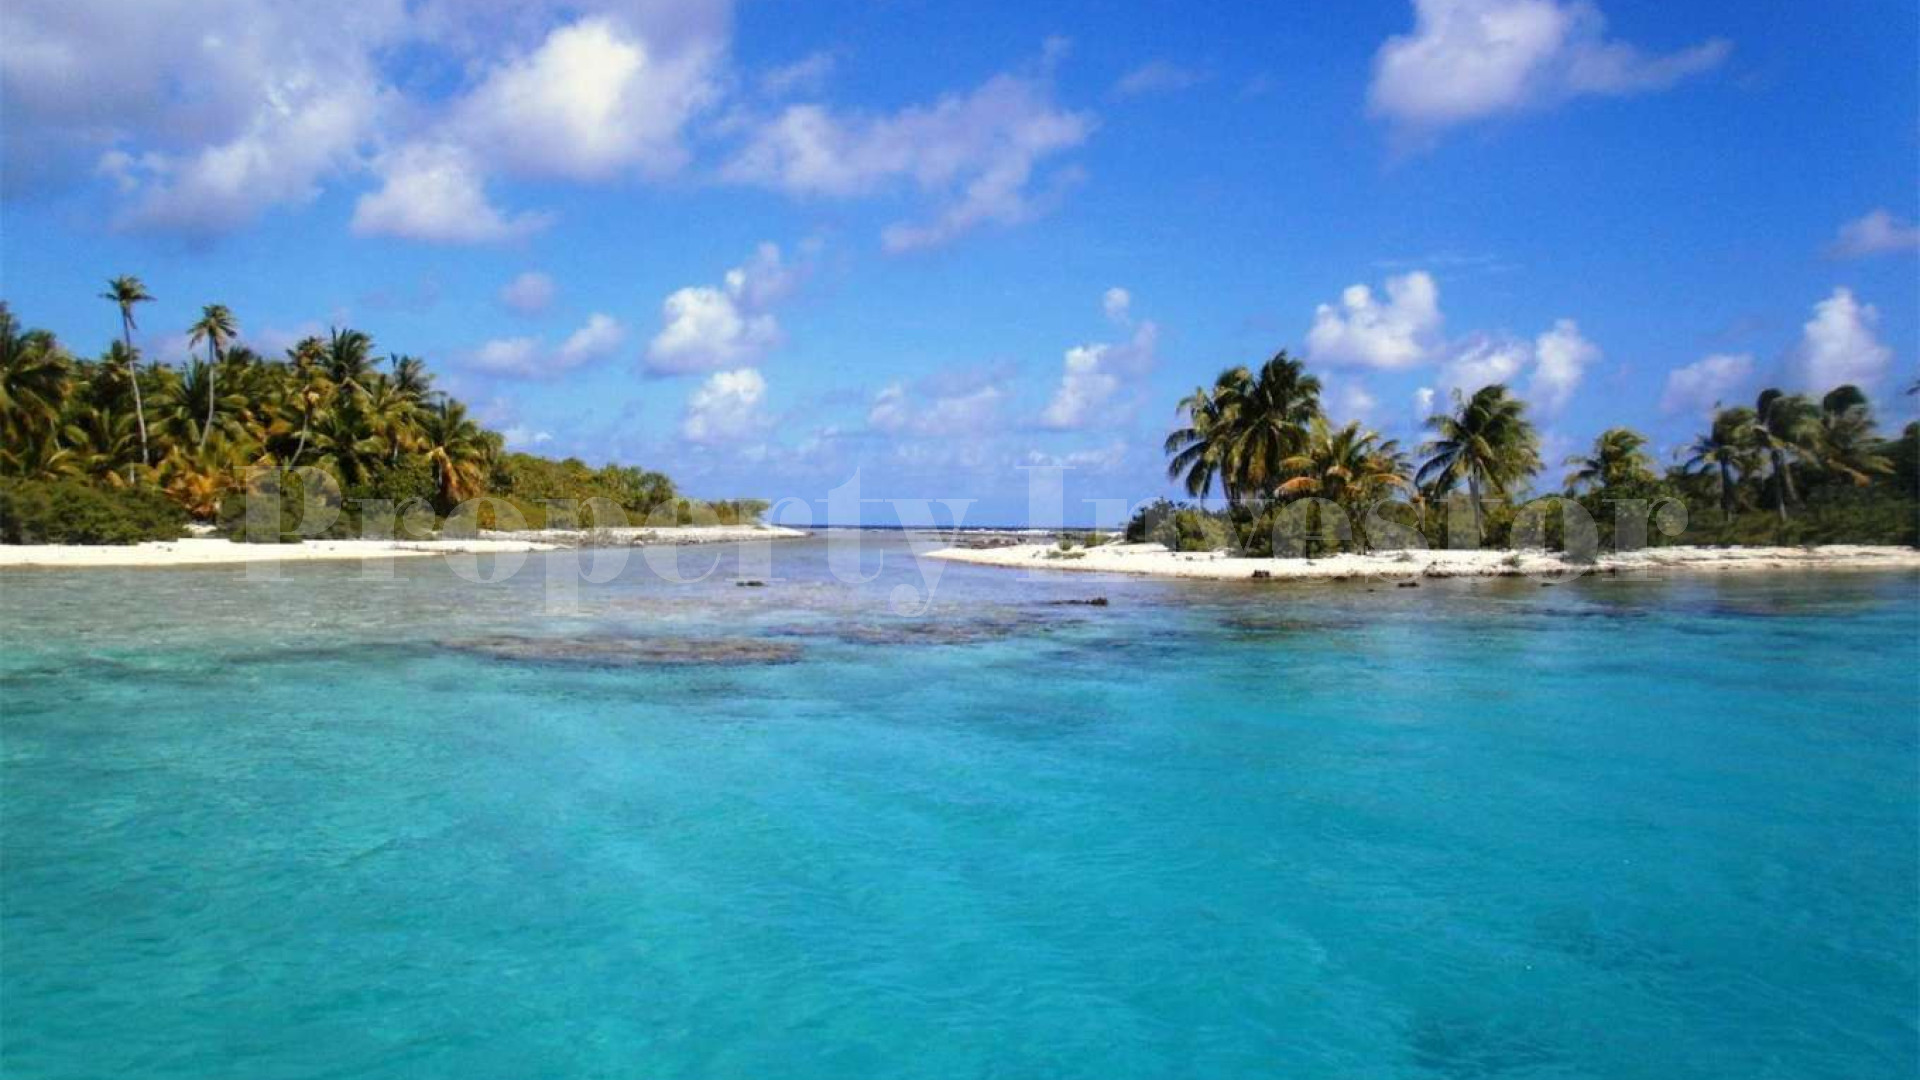 Stunning 1.4 Hectare Virgin Island for Sale in French Polynesia